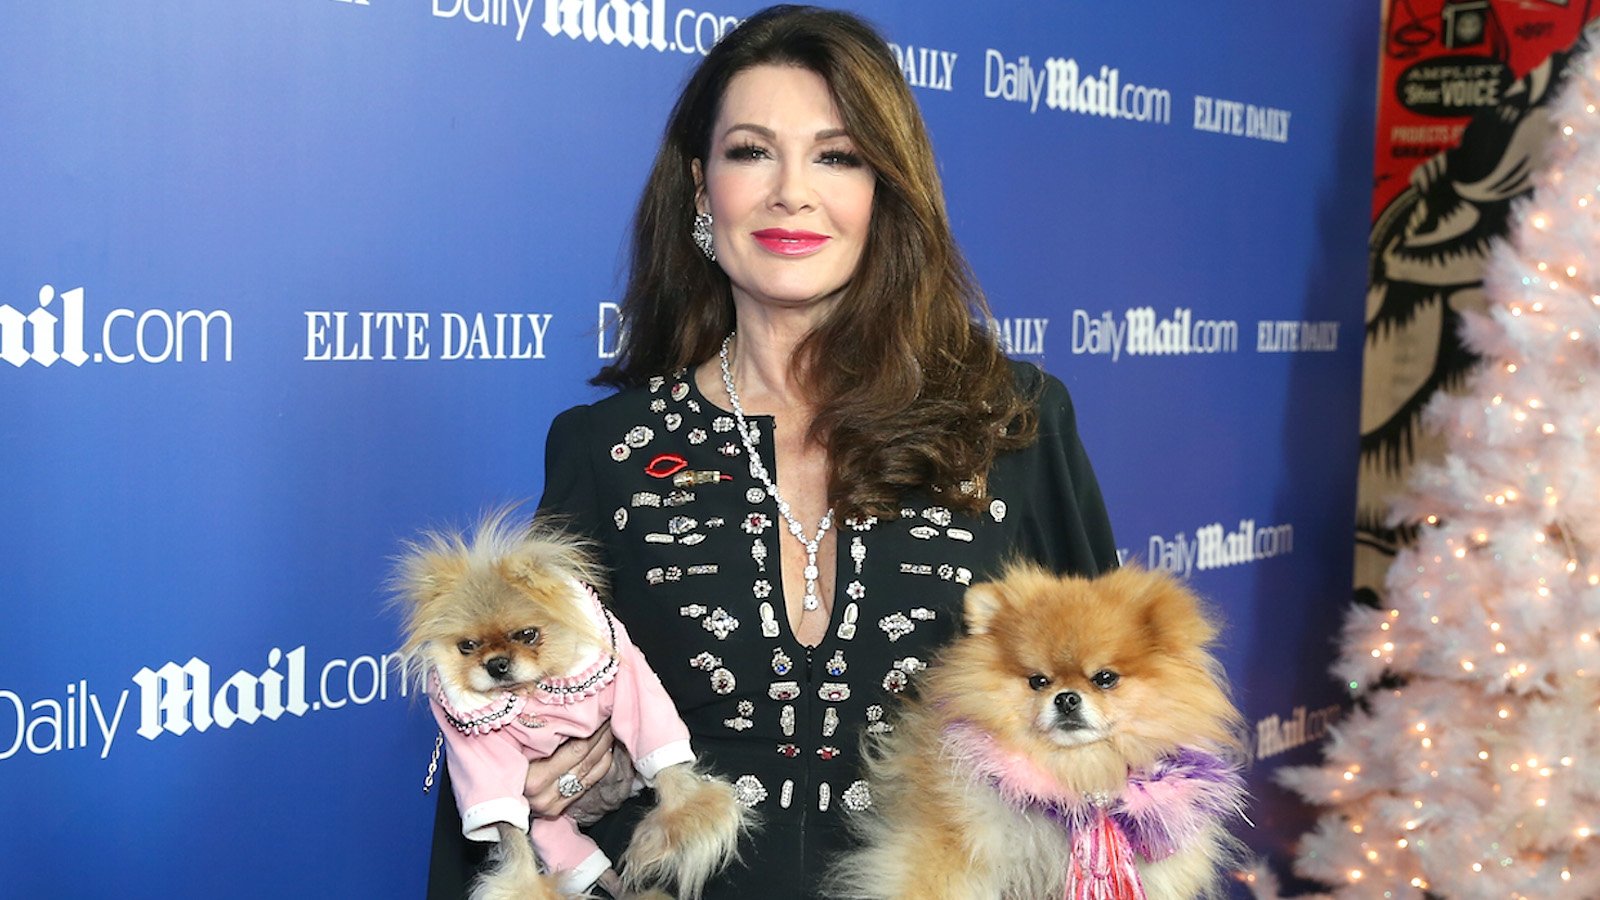 Lisa Vanderpump from The Real Housewives of Beverly Hills is holding her two dogs.